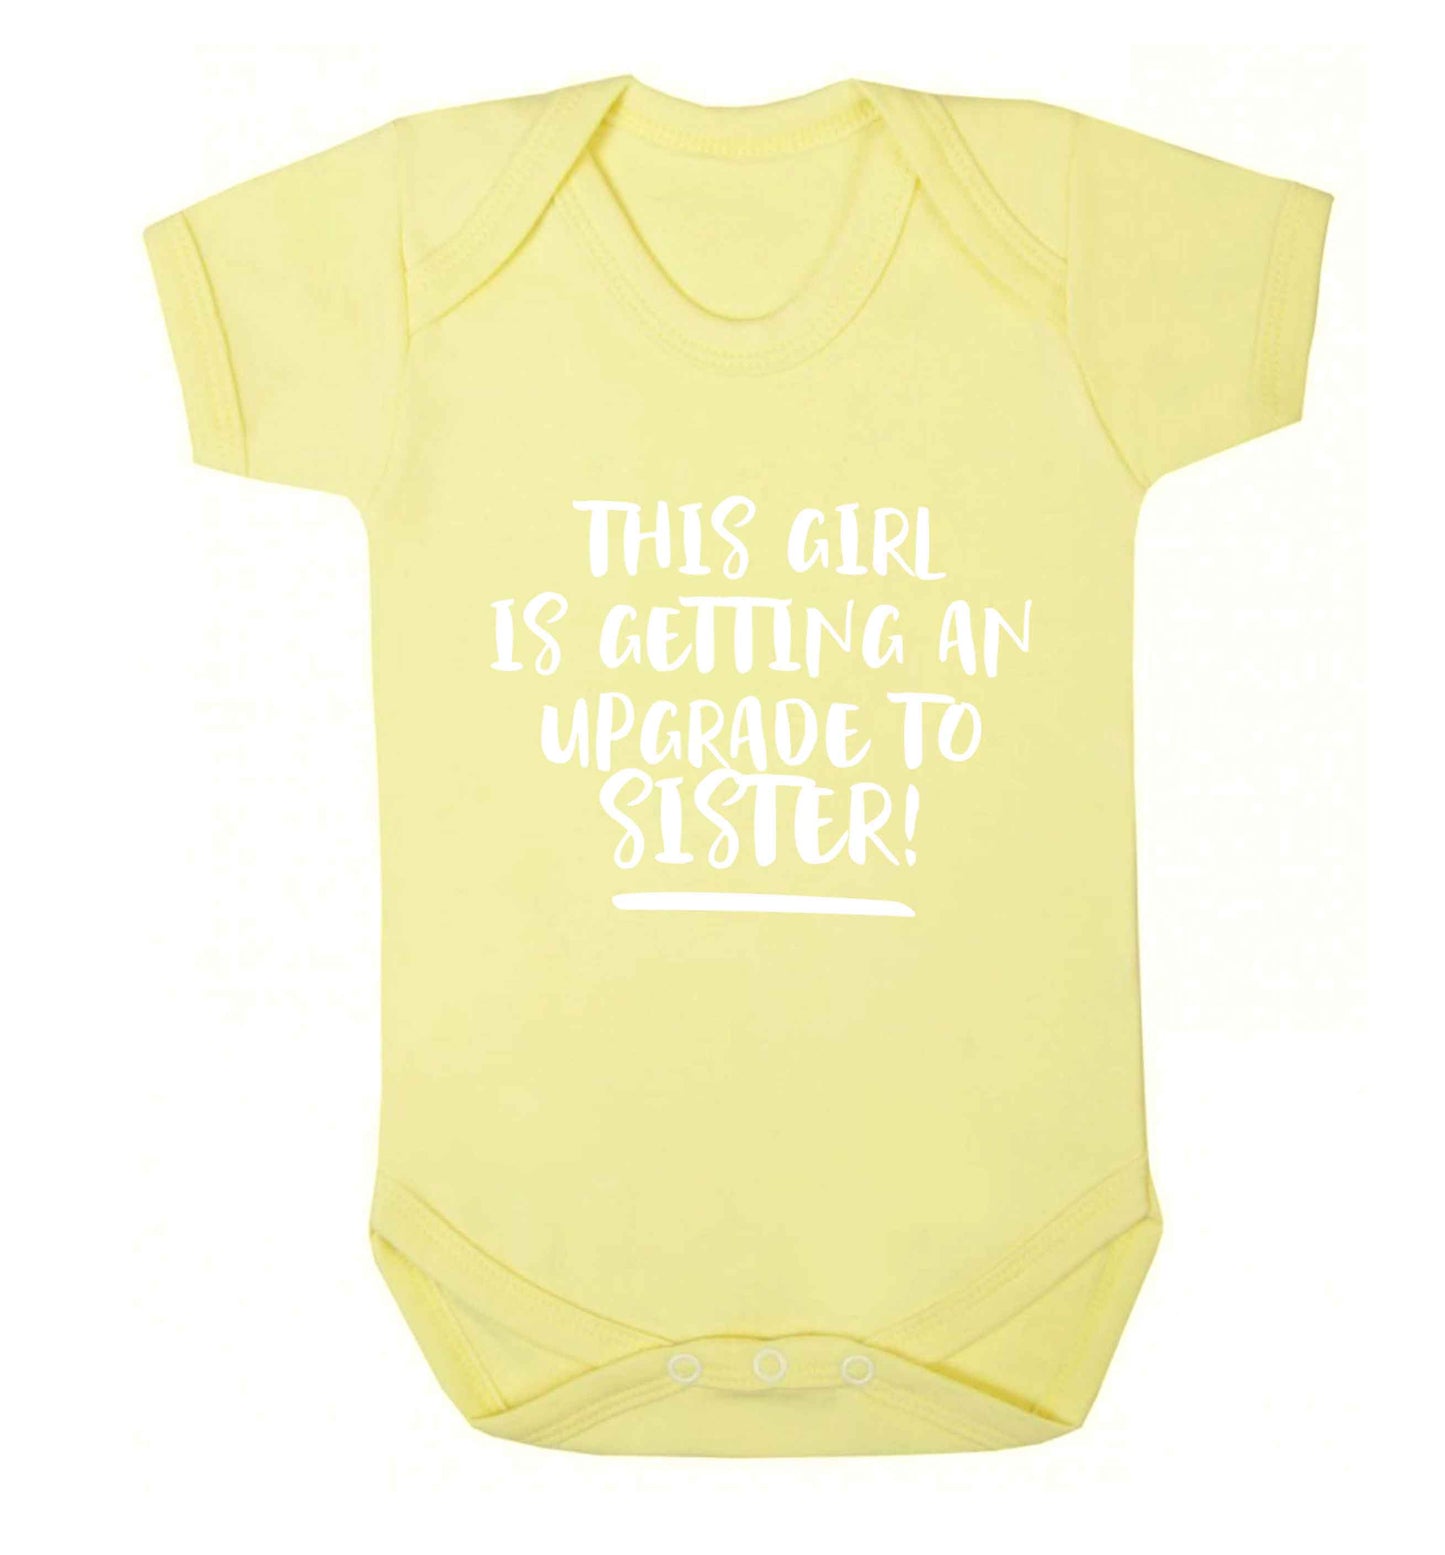 This girl is getting an upgrade to sister! Baby Vest pale yellow 18-24 months